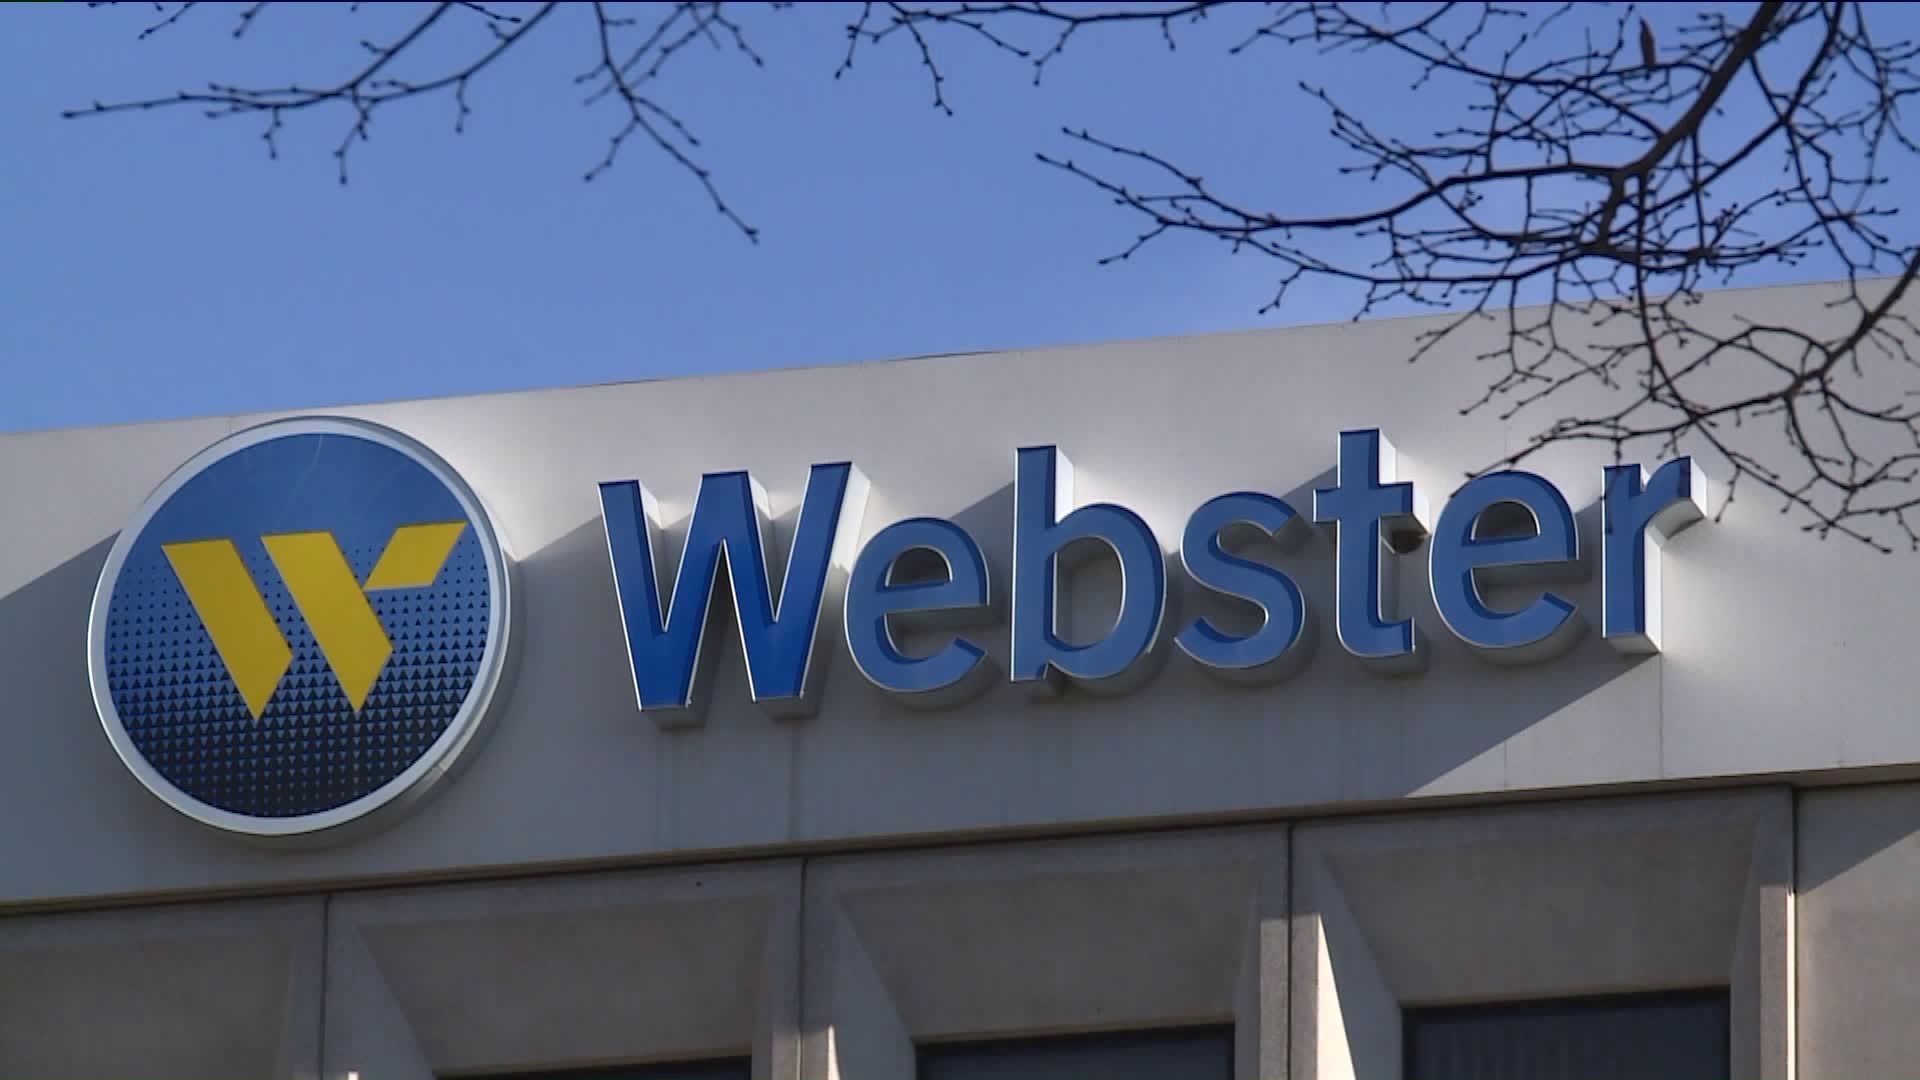 WorkinCT: Jim Smith reflects on his time as CEO of Webster Bank